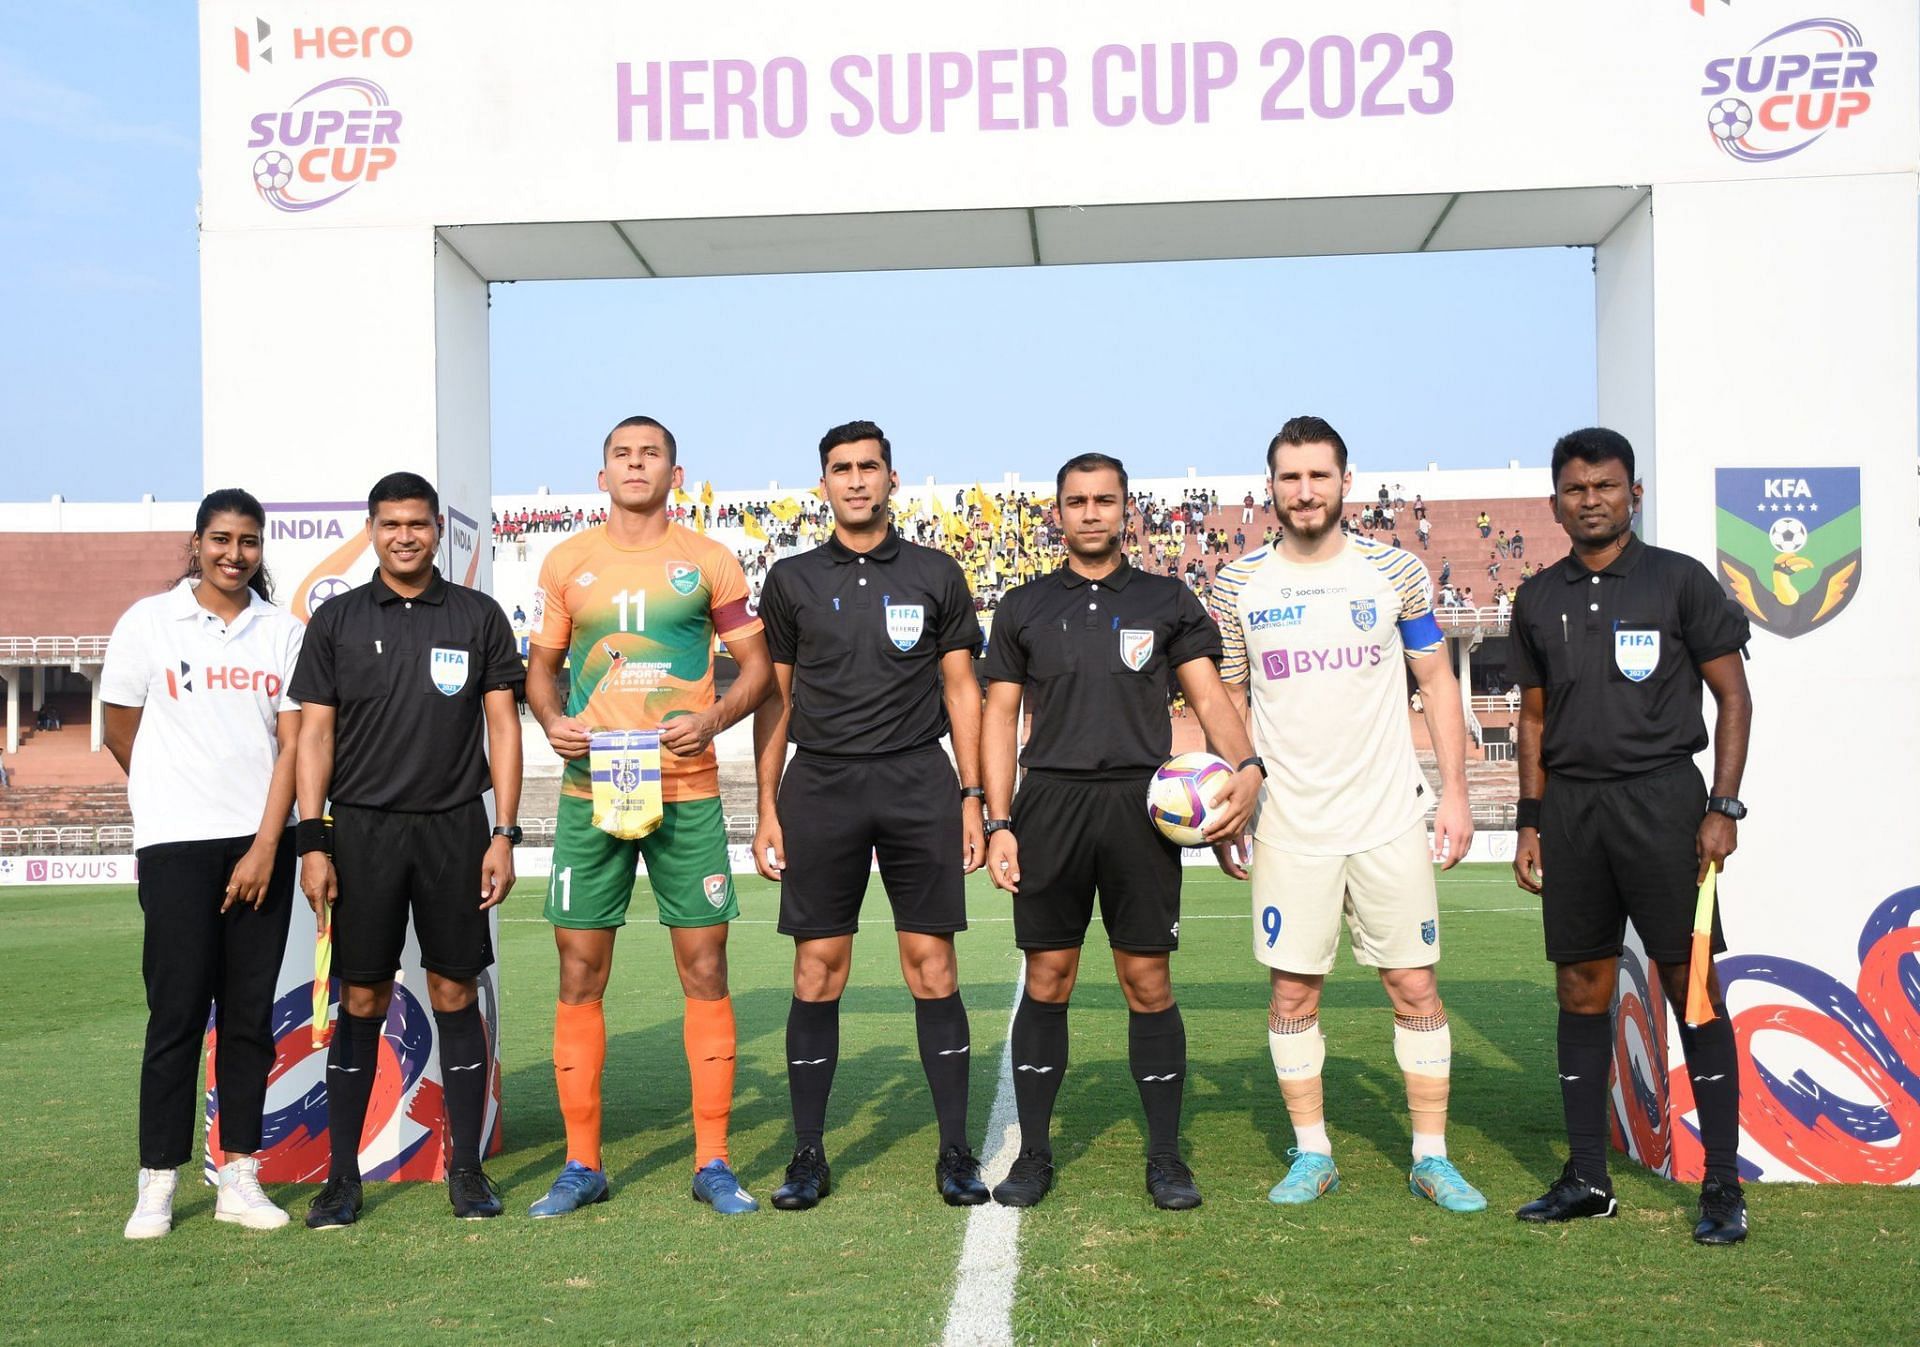 Kerala Blasters FC suffered their first defeat in Hero Super Cup 2023.